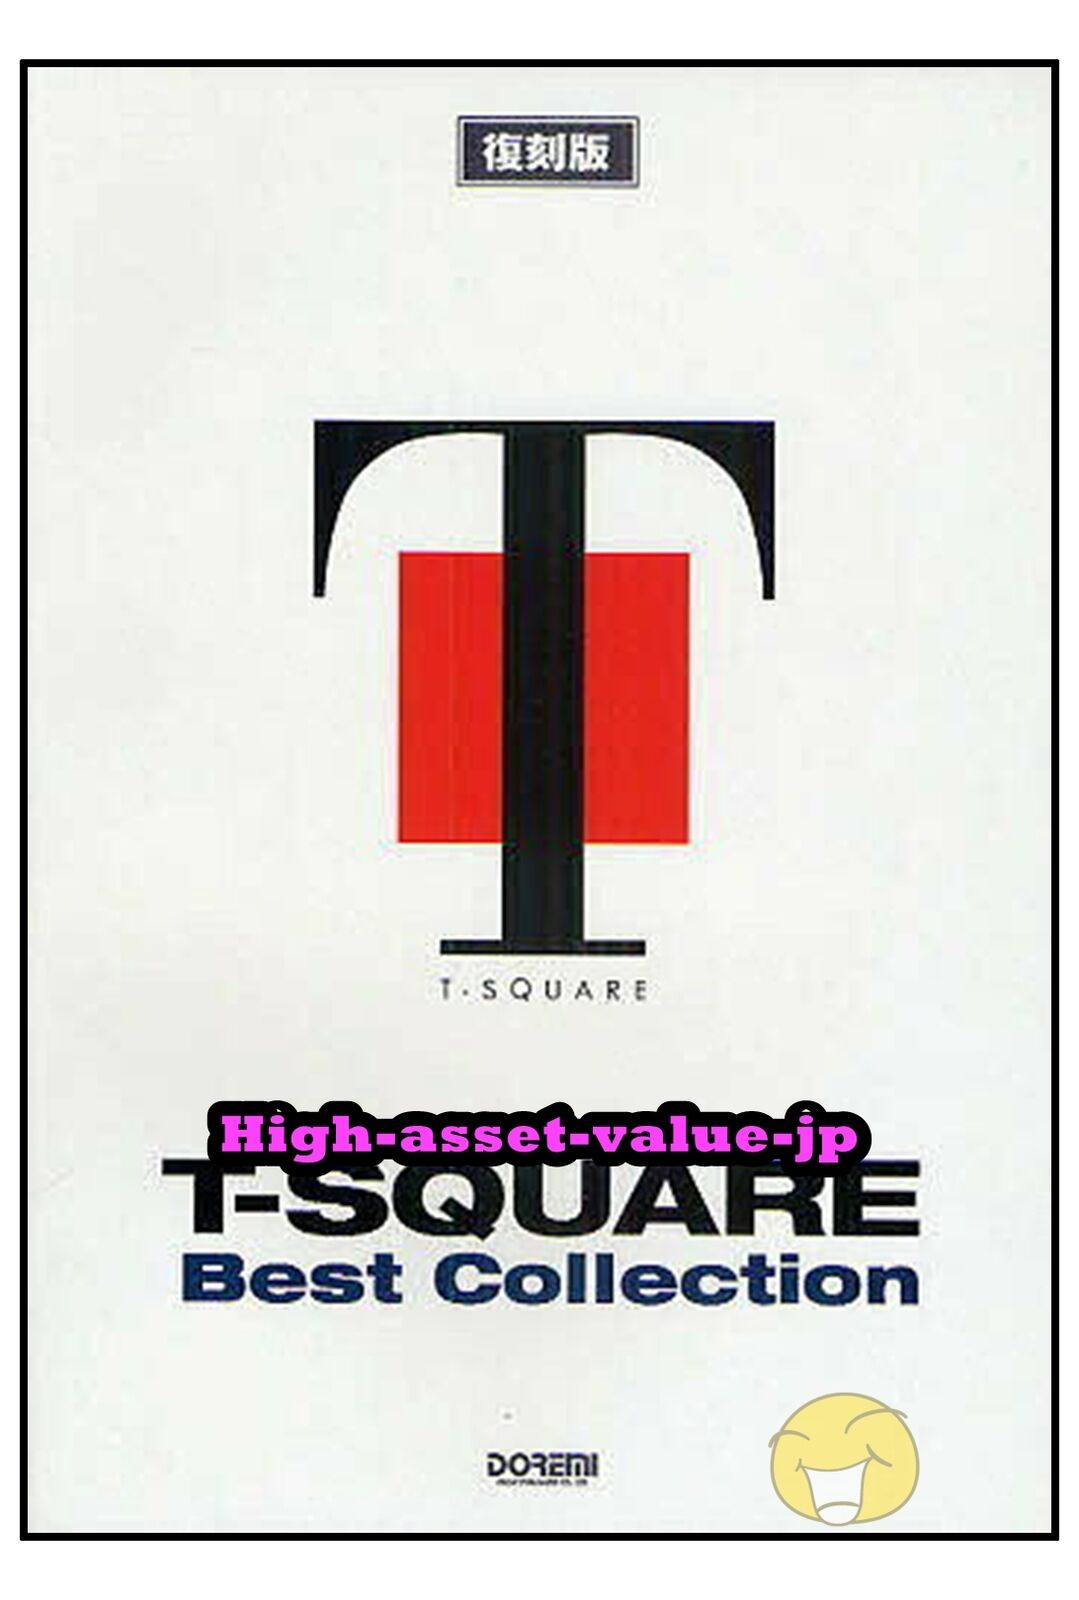 T-square Best Collection Band Score Sheet Music Book Reprint 